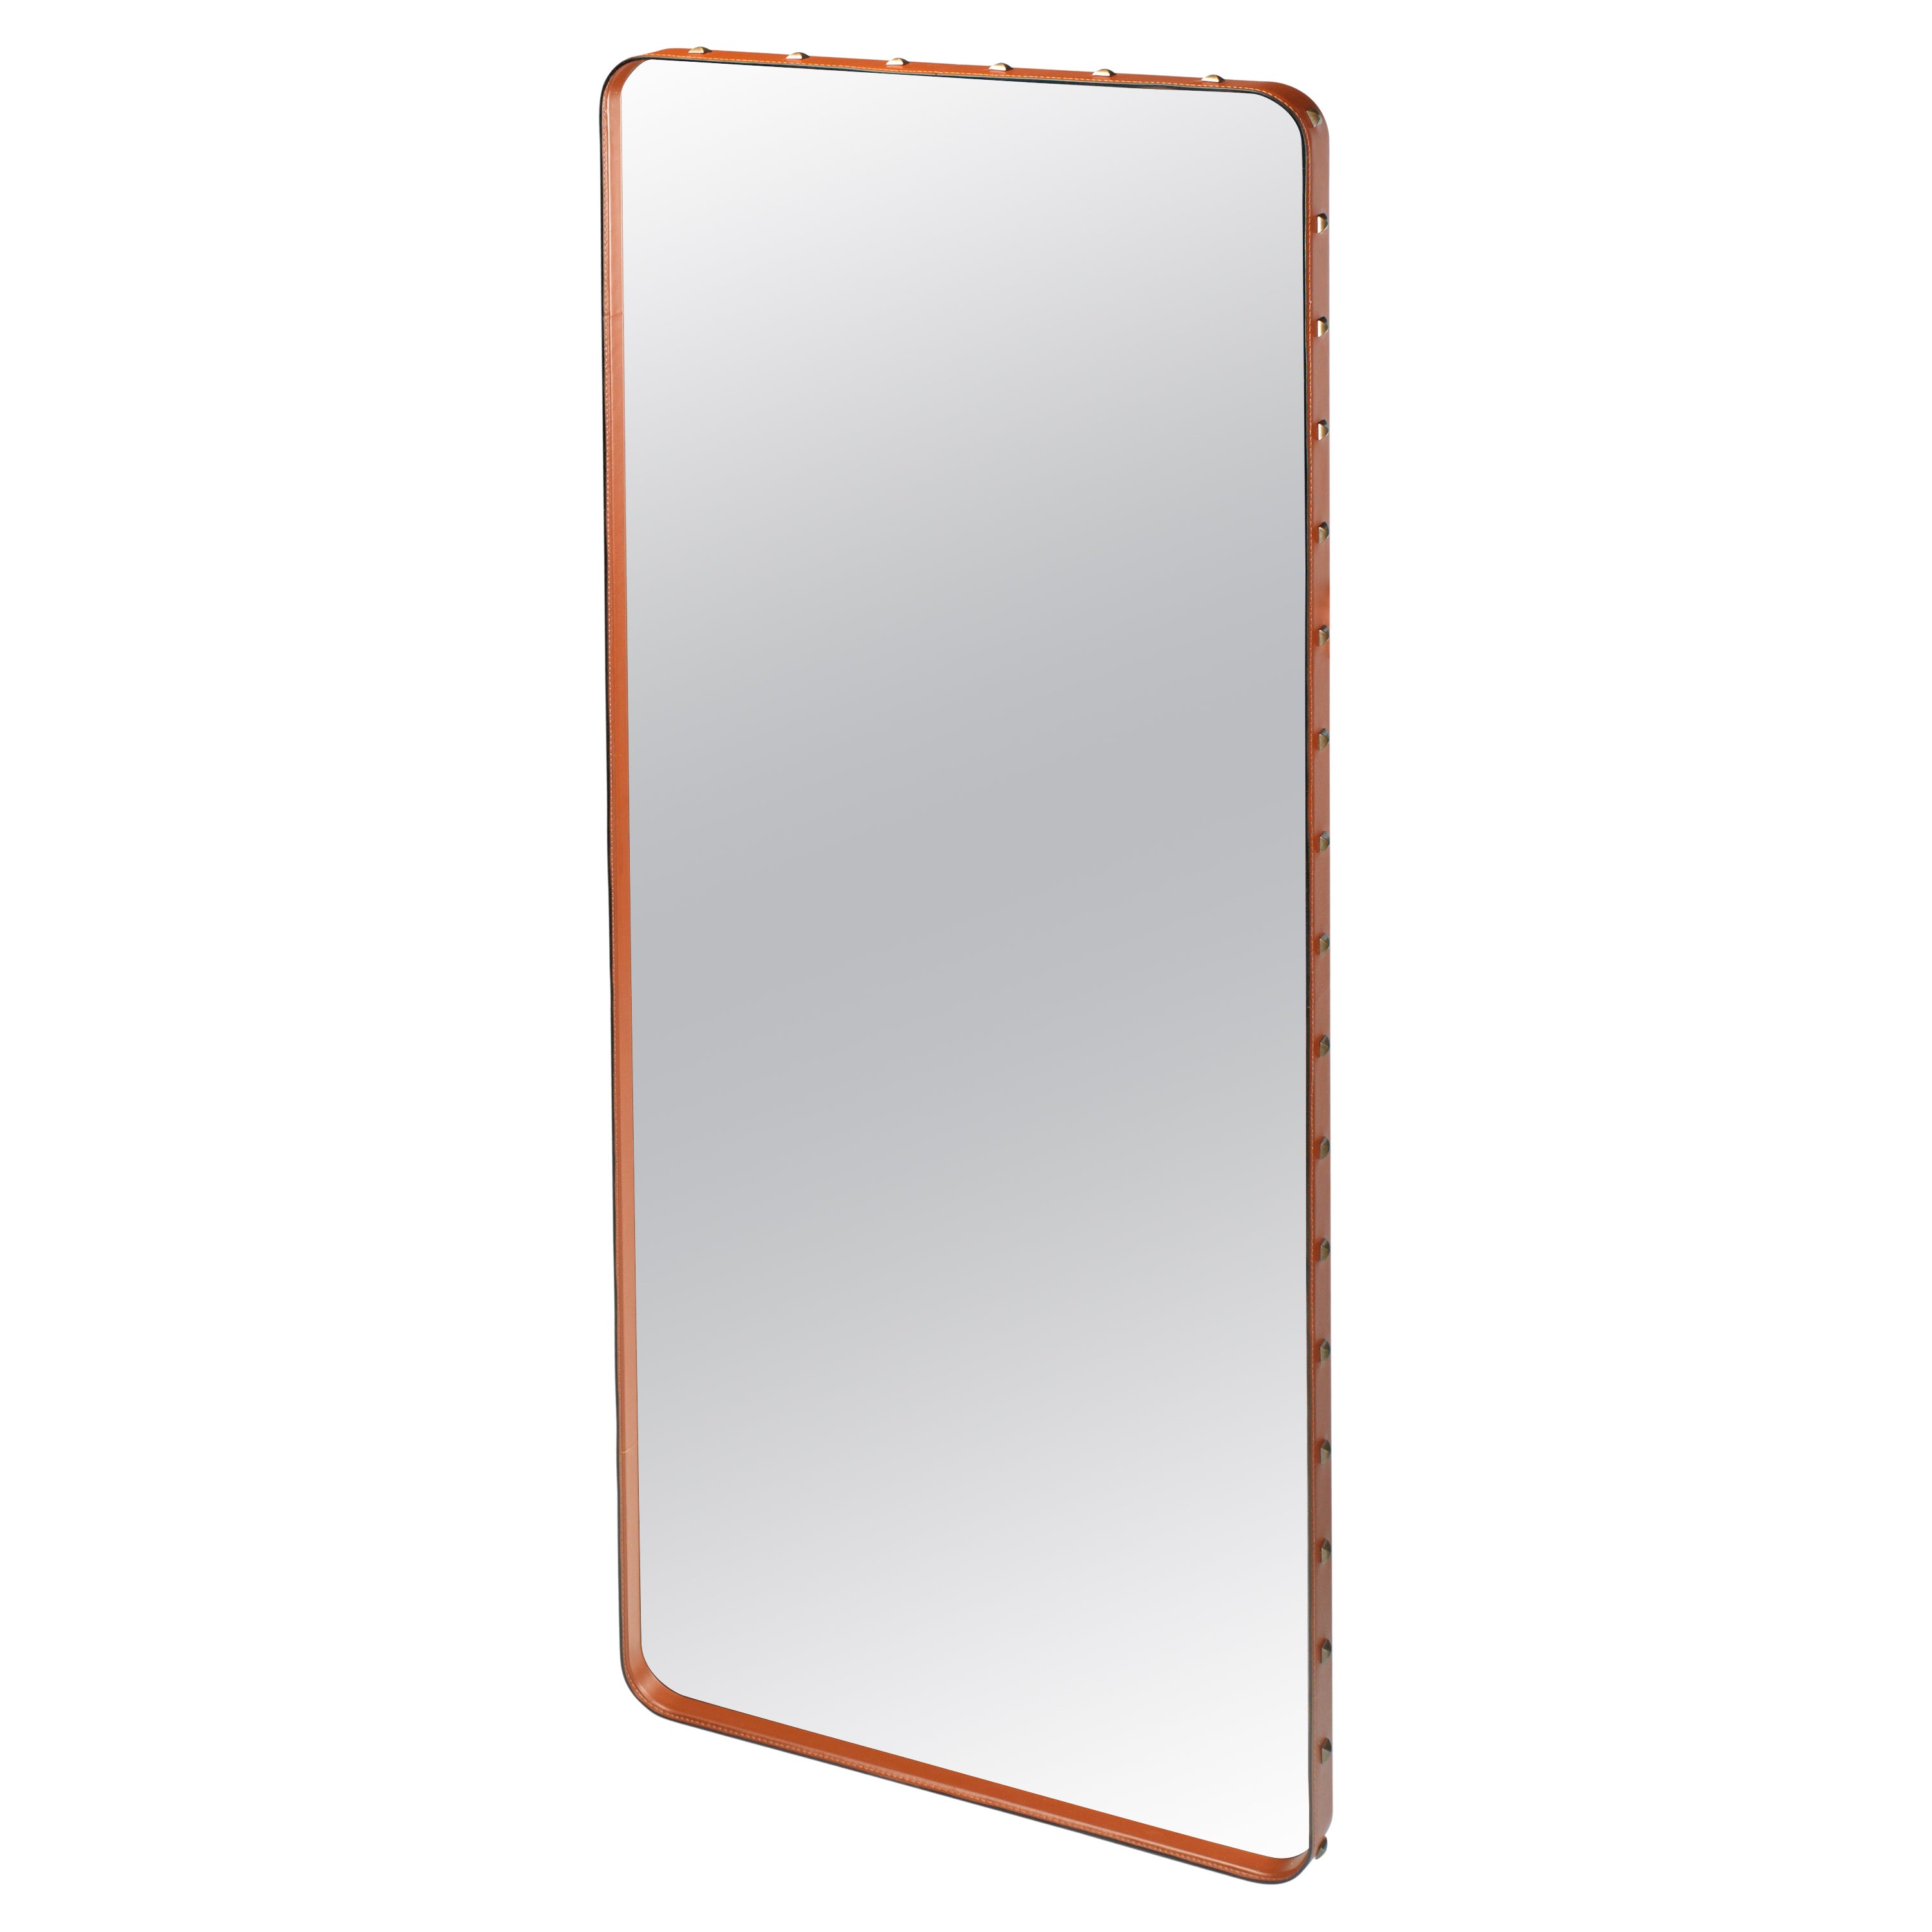 Medium Jacques Adnet 'Rectangulaire' Wall Mirror in Tan Leather for GUBI